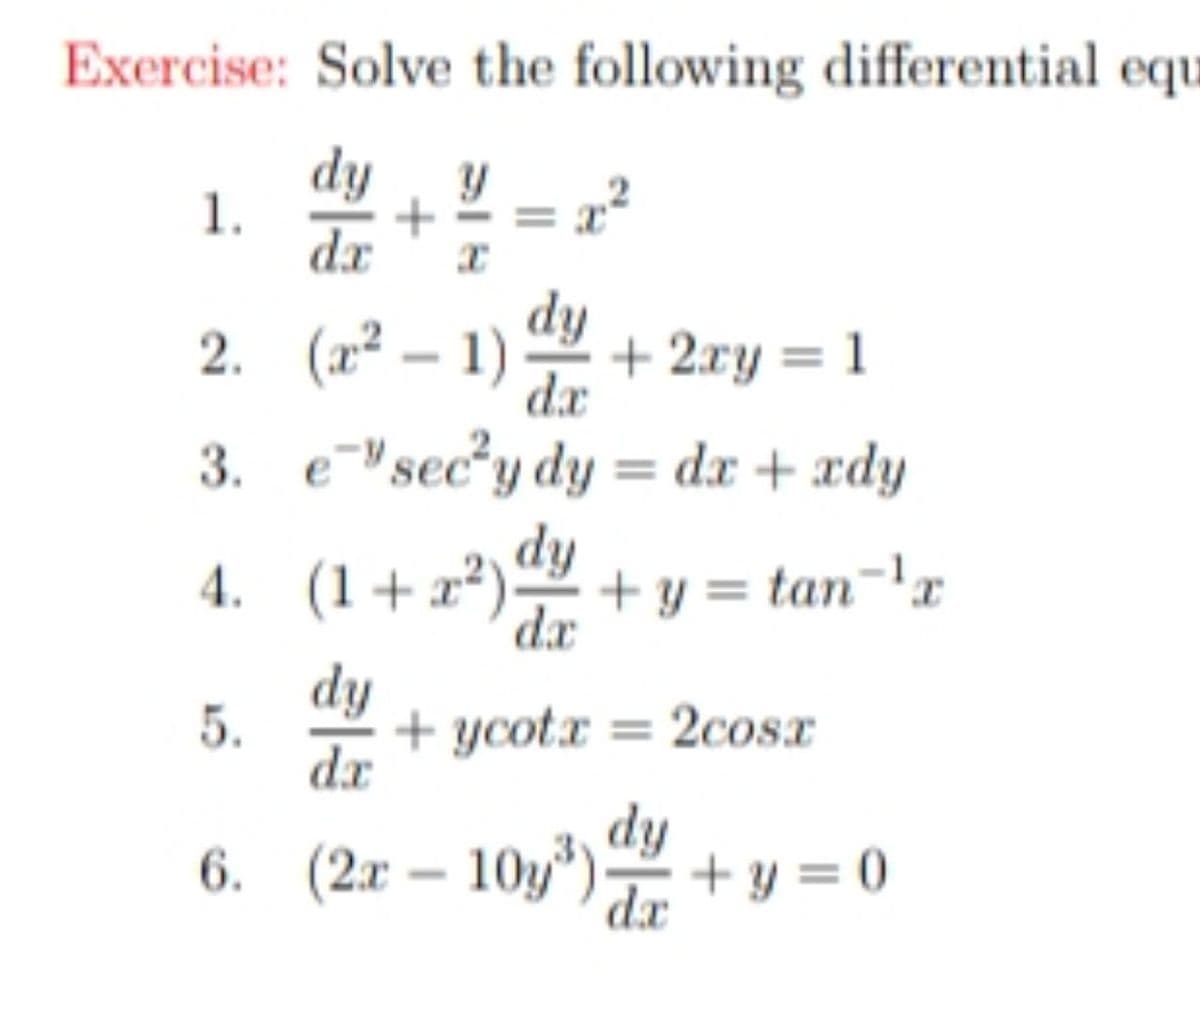 Exercise: Solve the following differential equ
dy
1.
dr
2. (a² – 1)
dy
+ 2xy = 1
da
3. esec*y dy = dx + xdy
dy
4. (1+x²)+ y = tan='x
da
dy
5.
+ ycotx = 2cosx
dx
dy
6. (2x – 10y*)+ y = 0
dx
